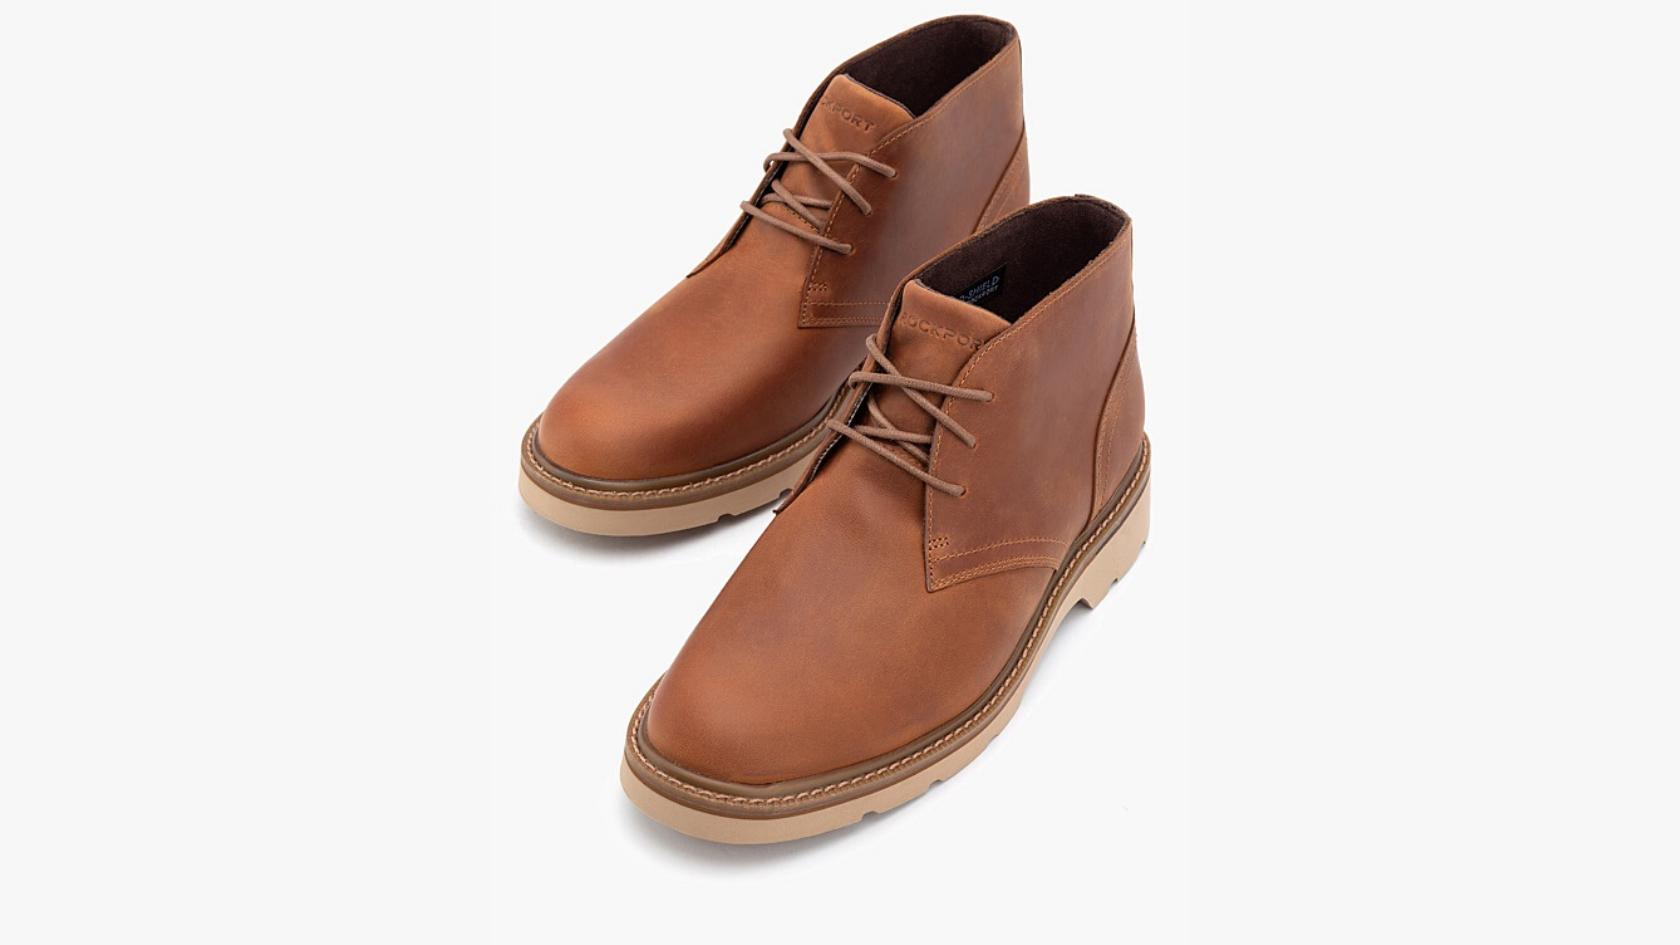 A pair of men’s Rockport tan leather lace up ankle boots against a neutral background.  